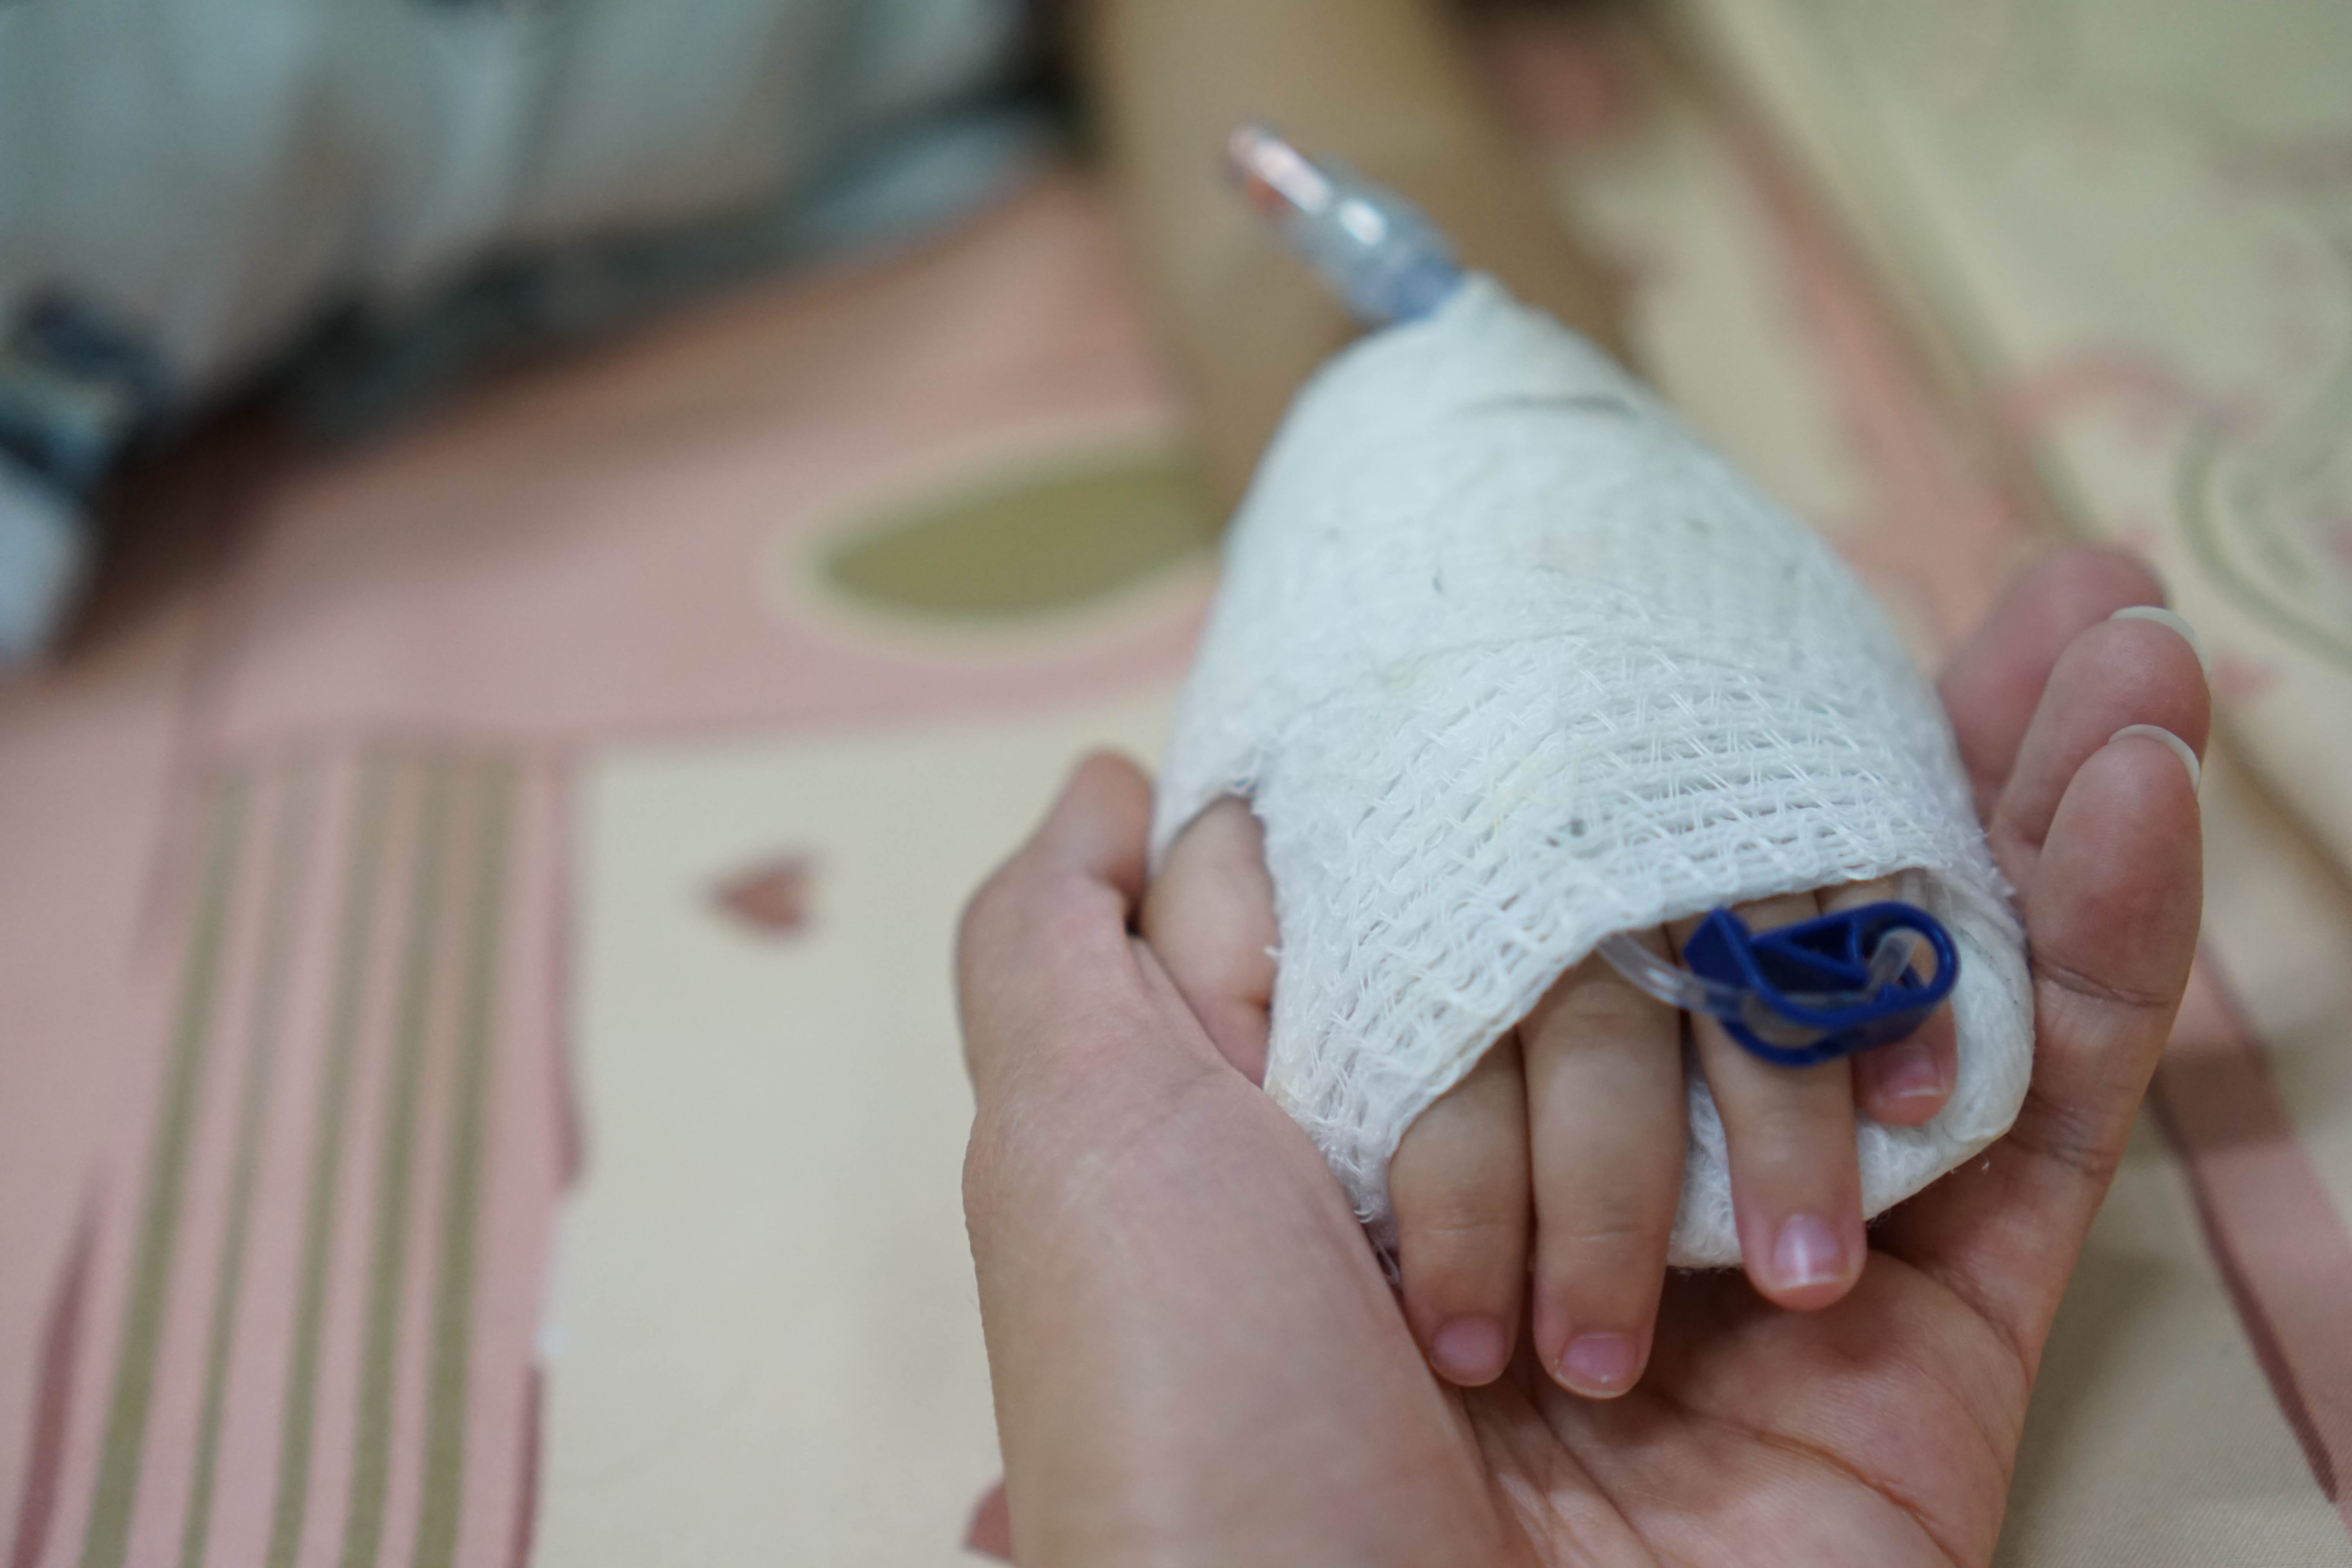 Mother is holding her child's hand in the hospital | Source: Shutterstock